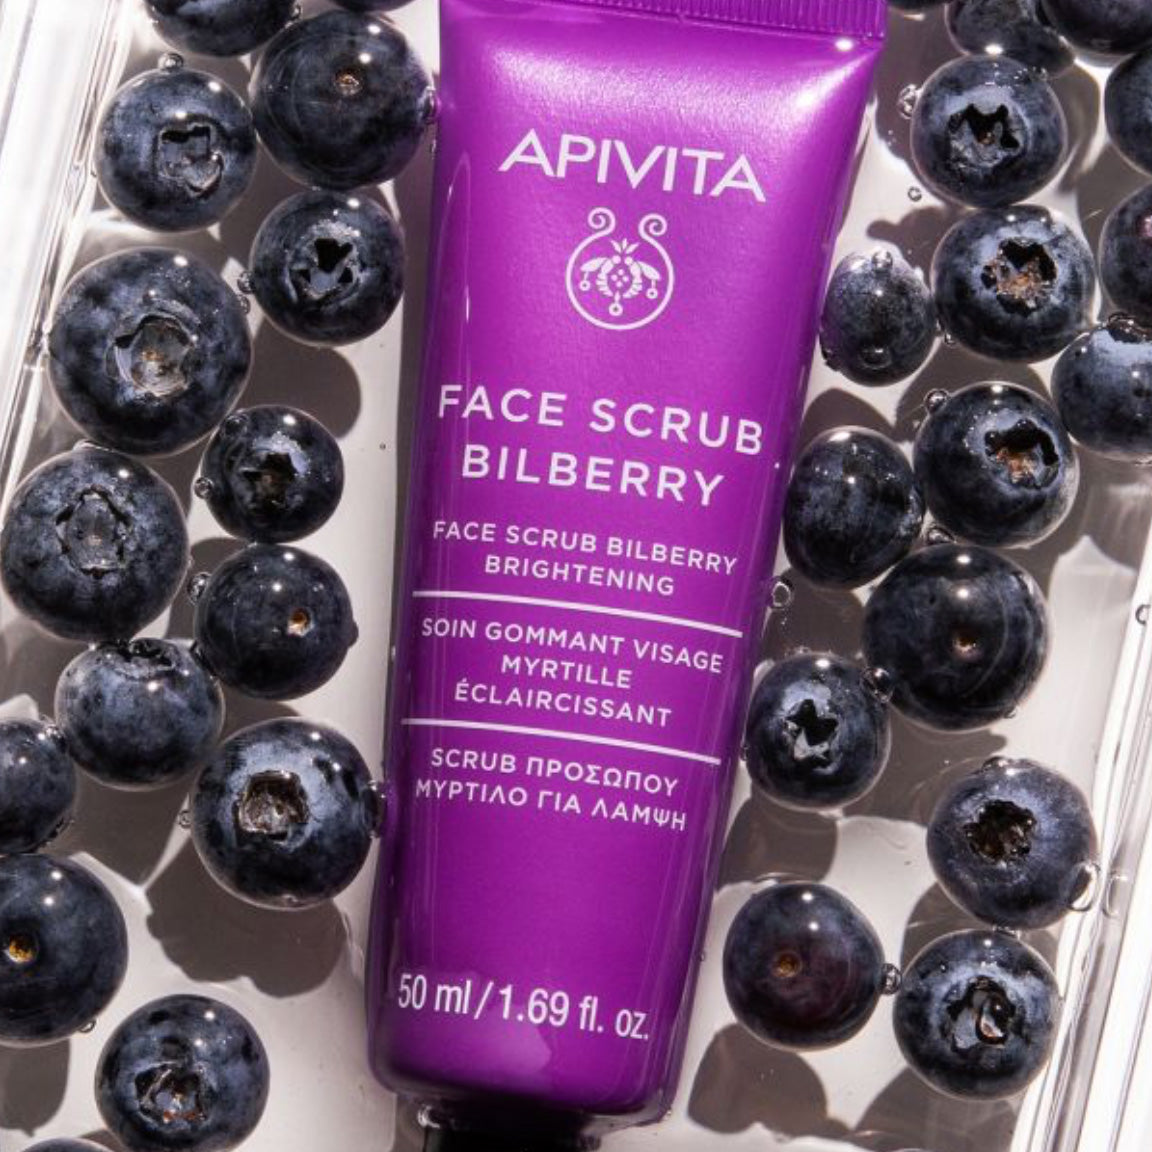 Apivita Face Scrub with Bilberry for very bright and refreshed skin.